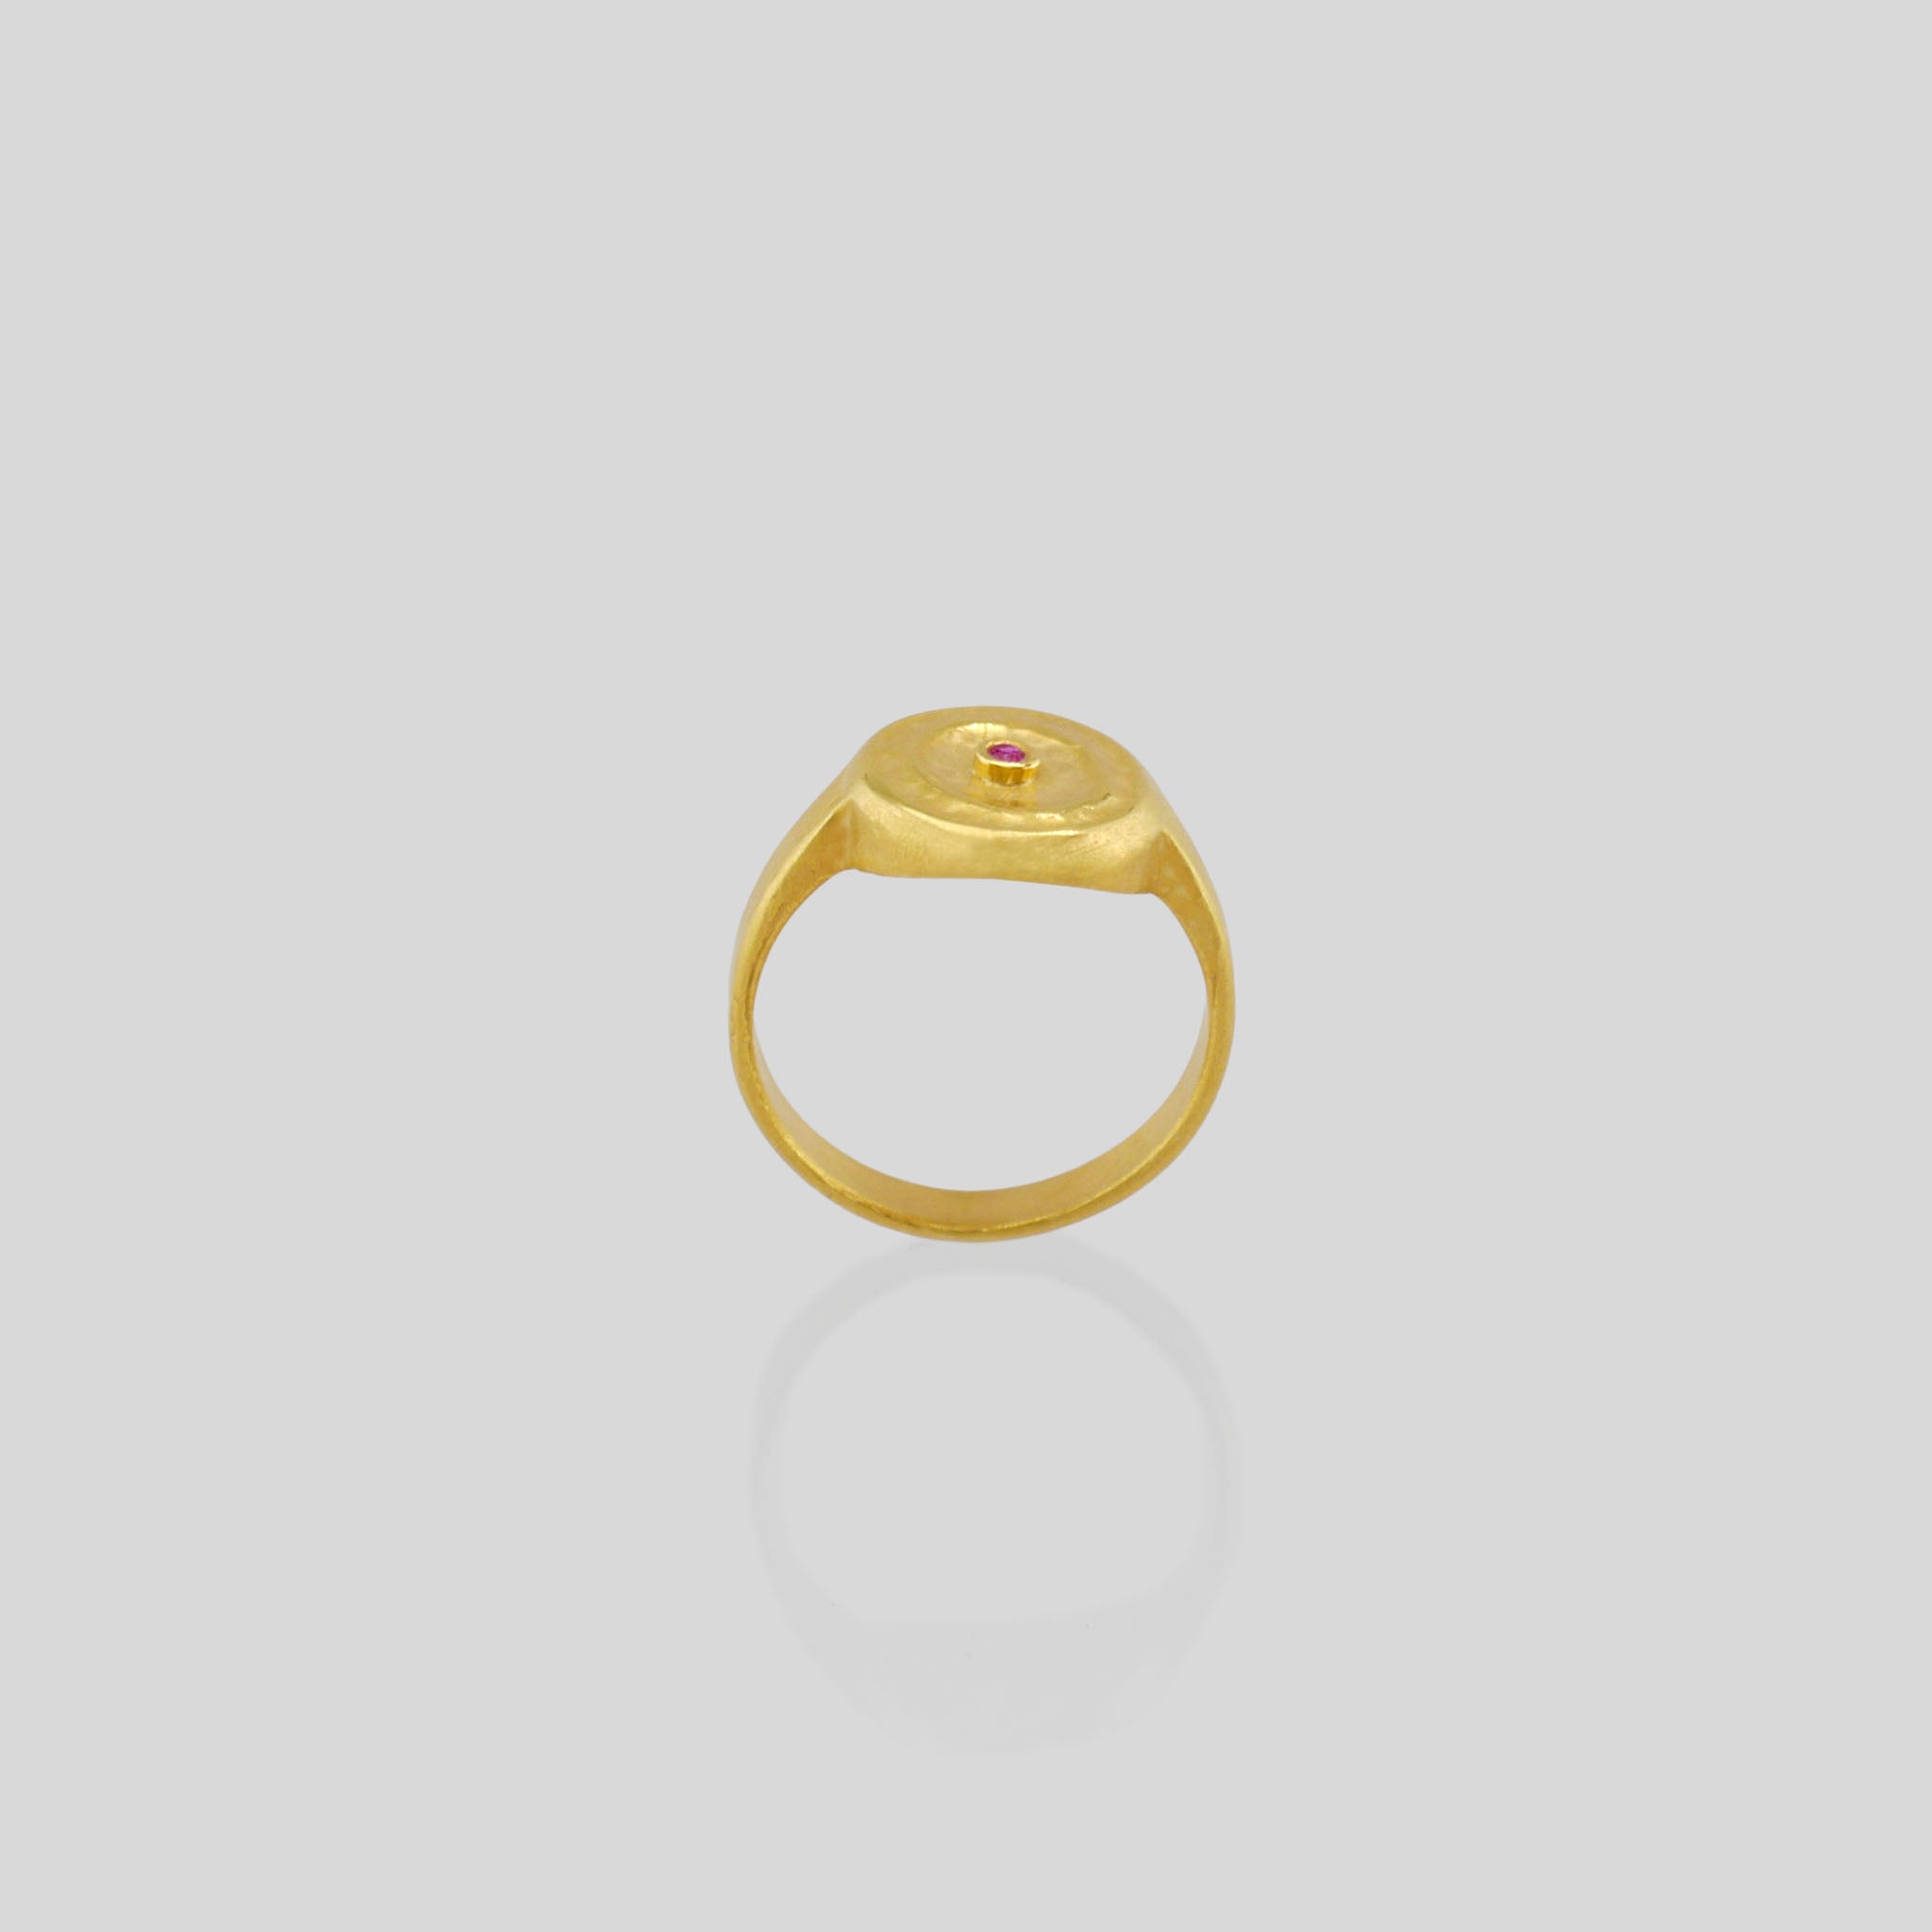 Side view of Handmade 18k Gold ring with a central Ruby, exuding vintage charm reminiscent of the Egyptian pharaohs' era.